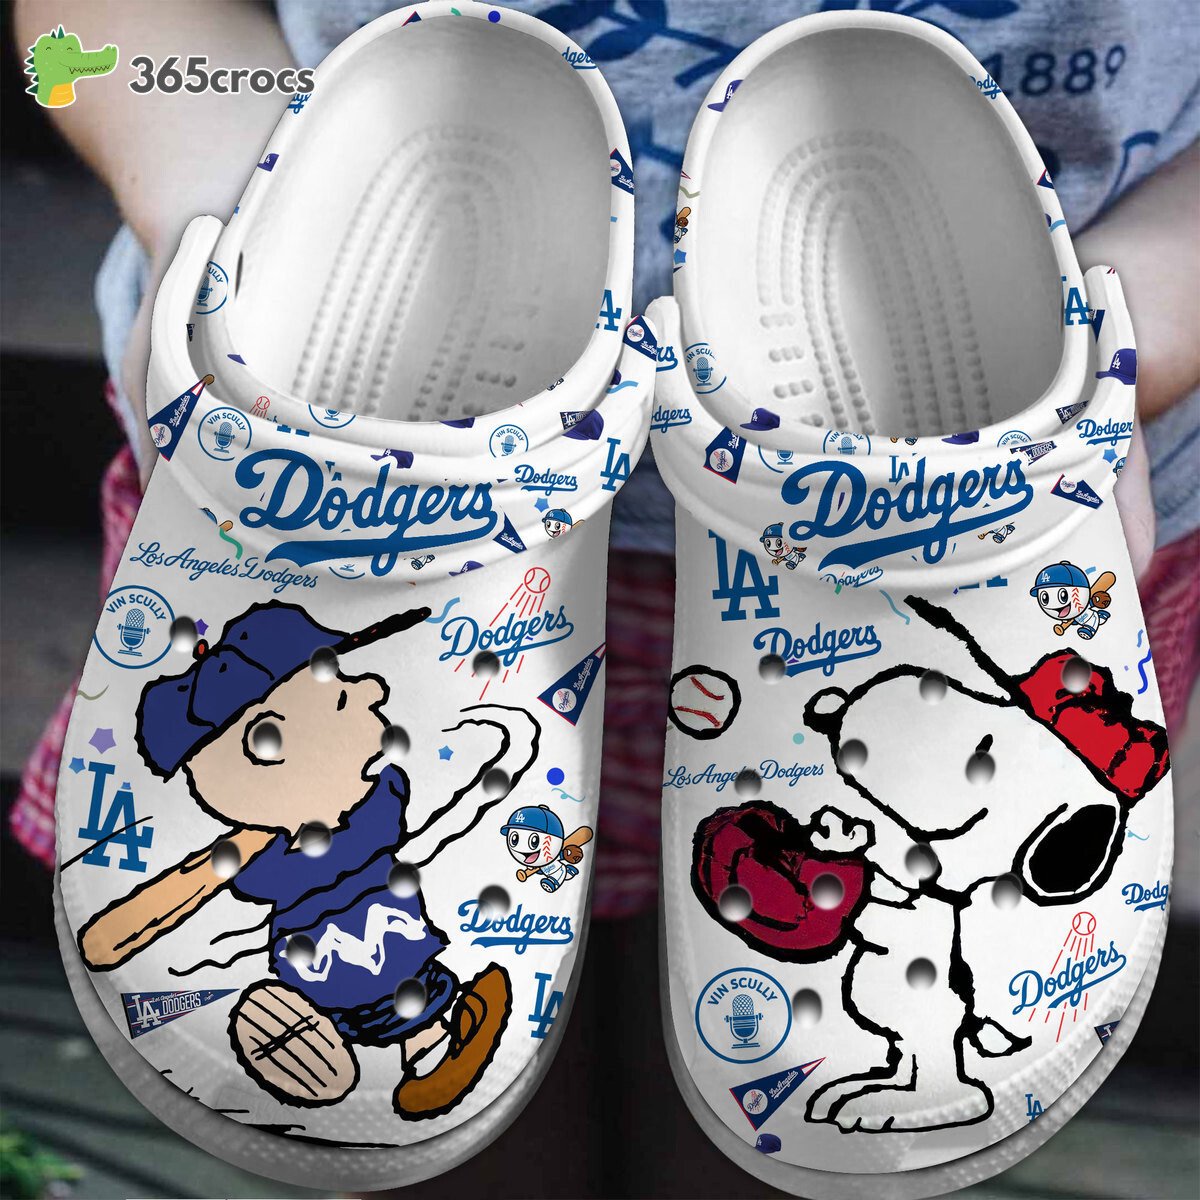 Los Angeles Dodgers Snoopy Peanuts MLB Cartoon Comfortable Clogs Shoes Crocss